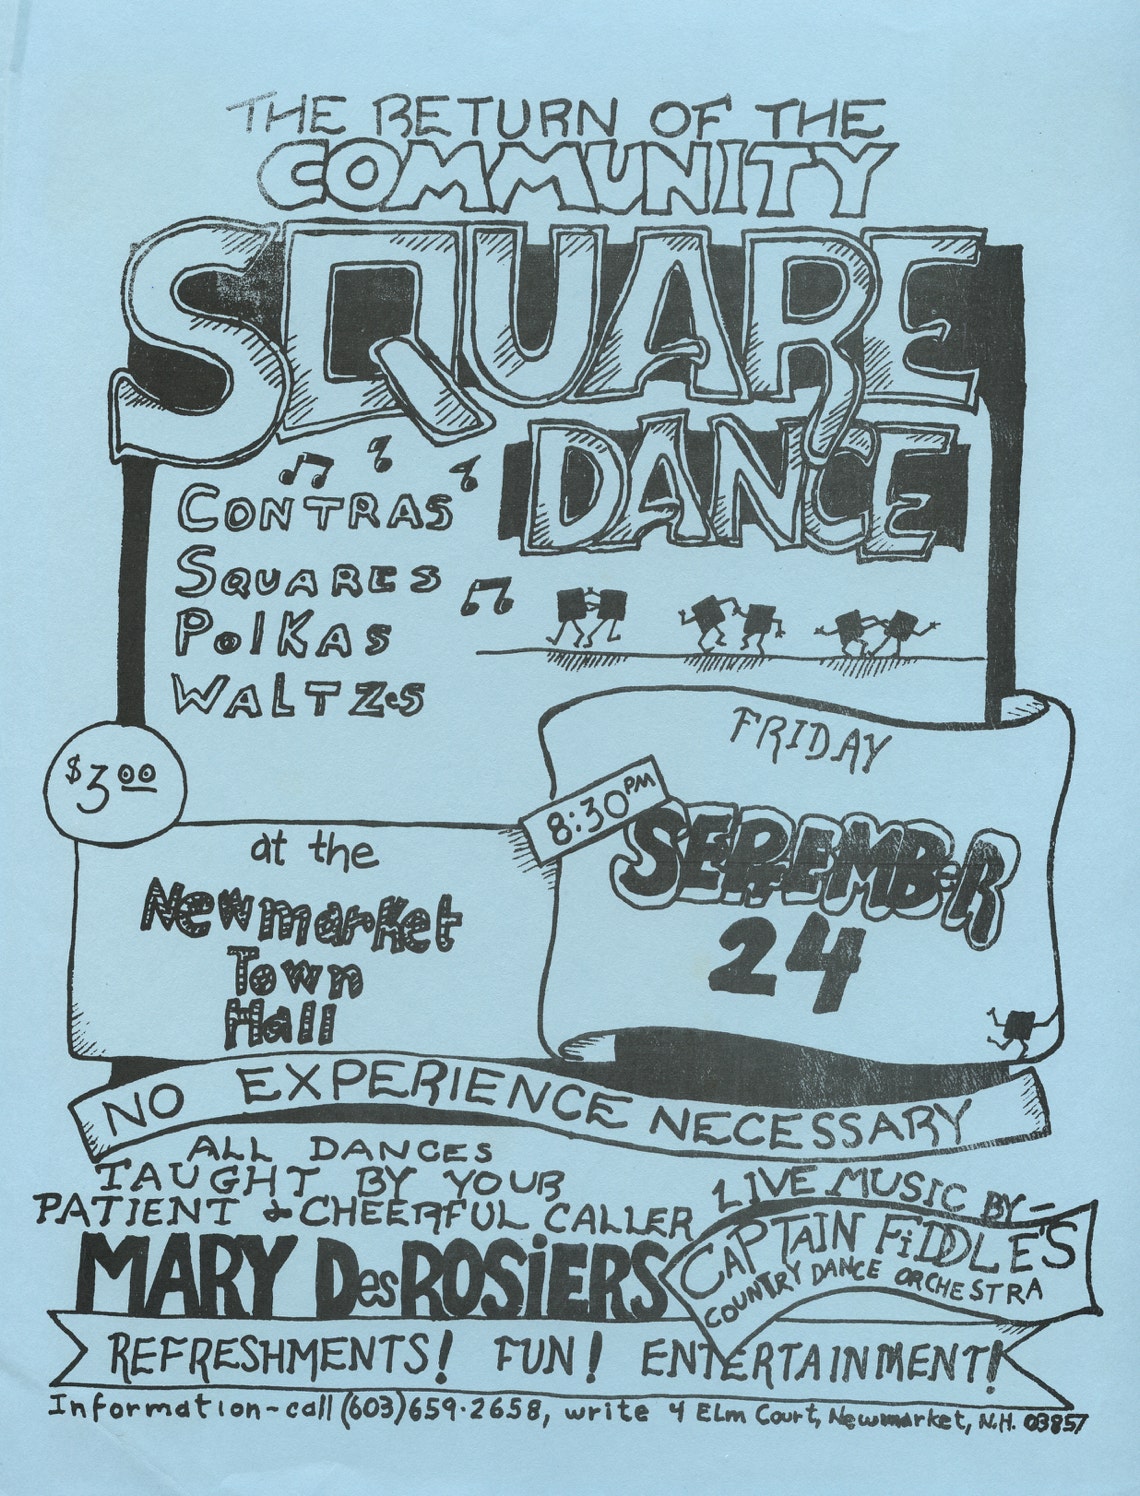 Poster for a Square Dance, Newmarket, New Hampshire